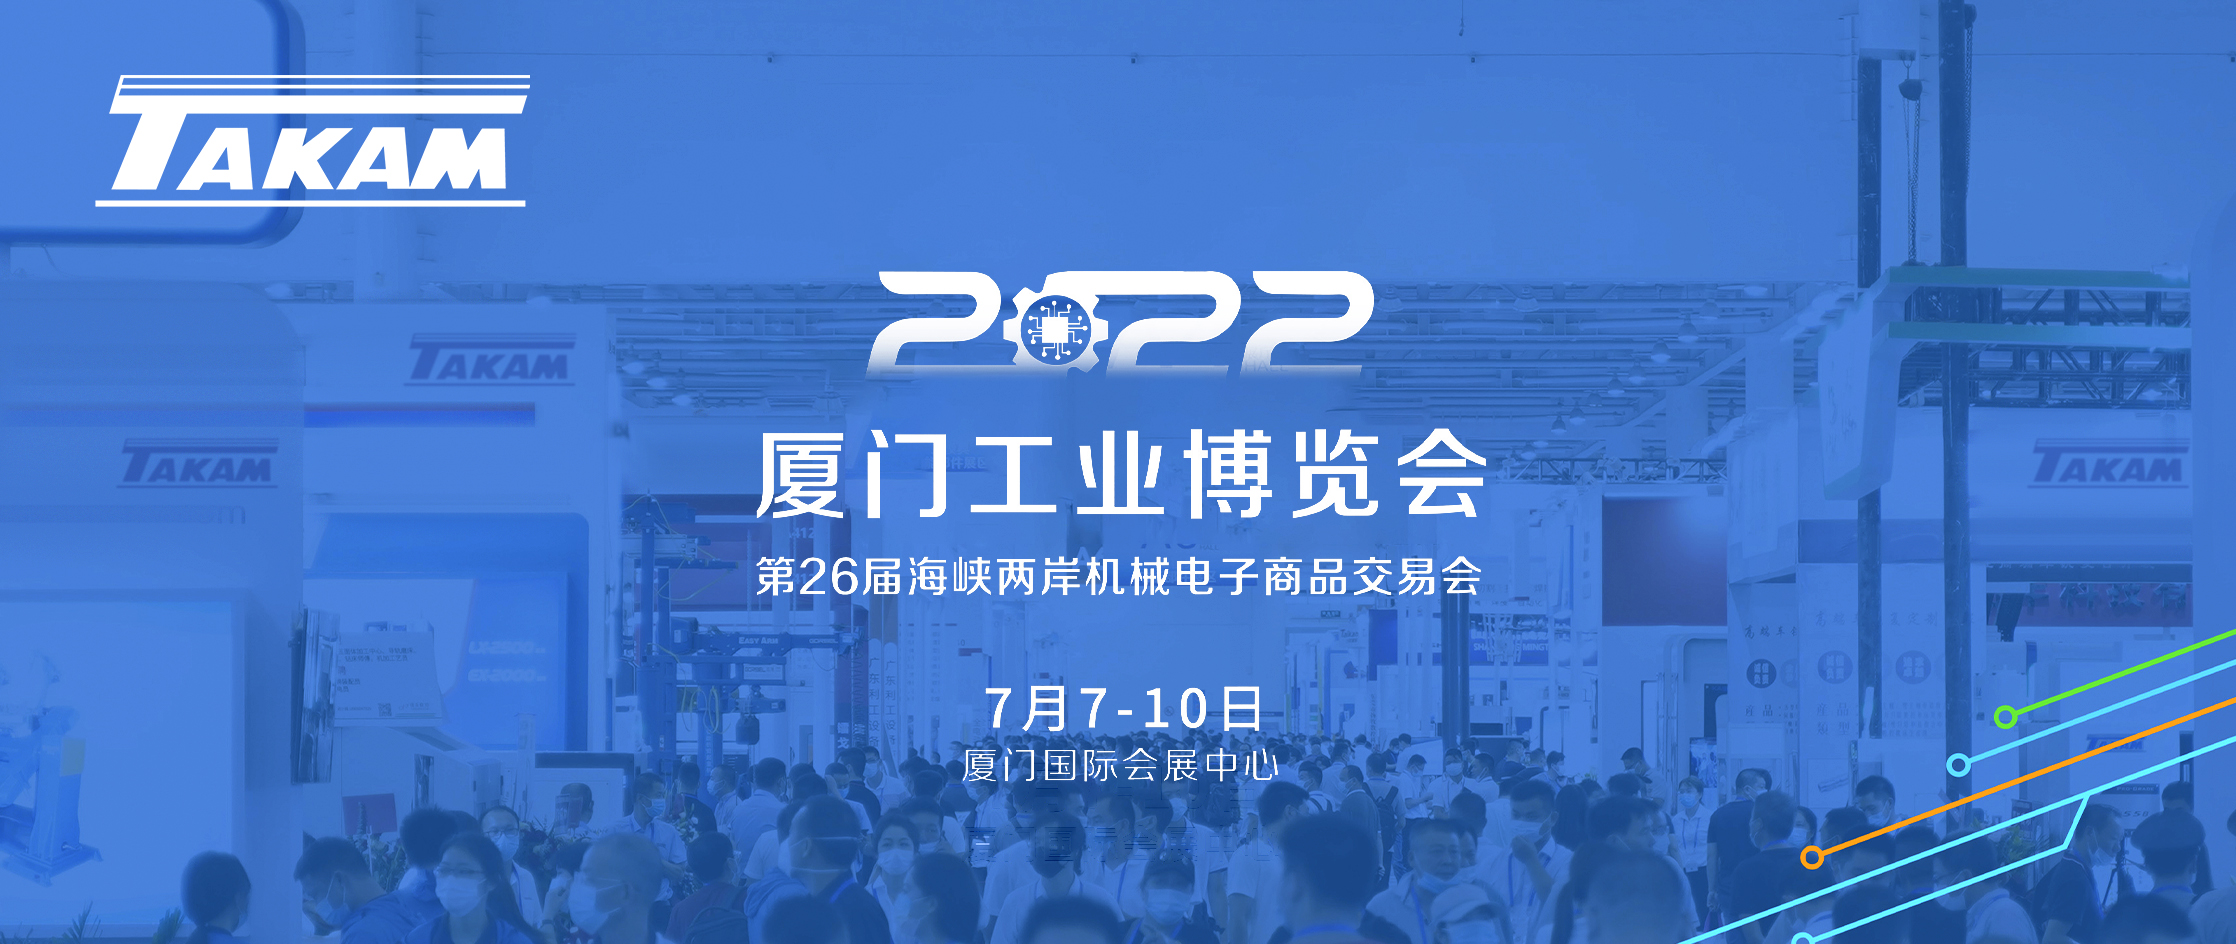 Takam Machinery invites you to attend the 2022 Xiamen Industrial Expo (Taiwan Trade Fair)